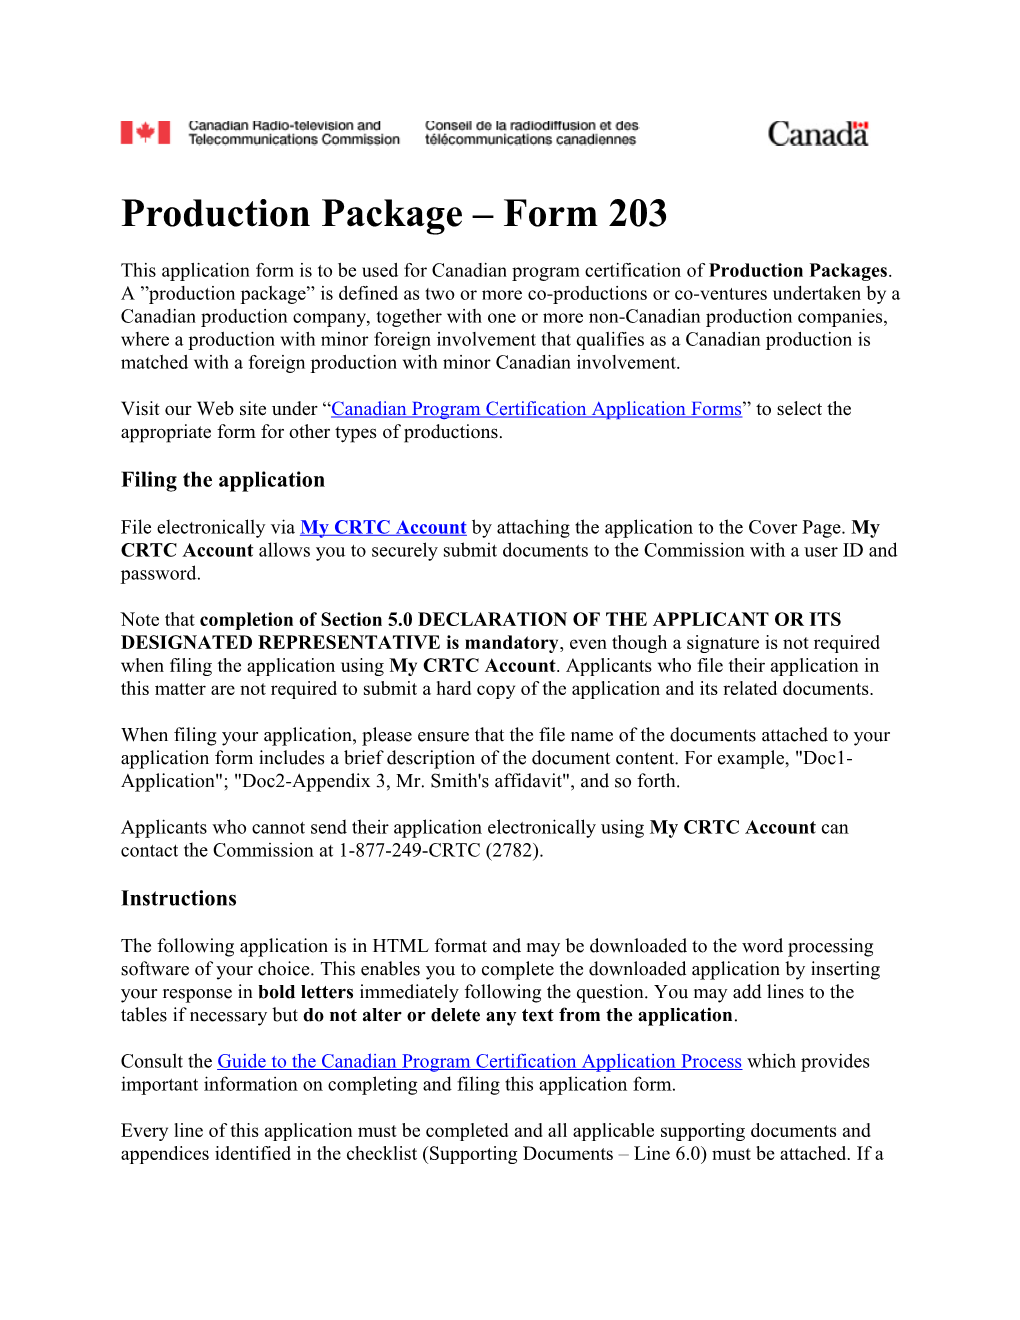 Production Package Form 203